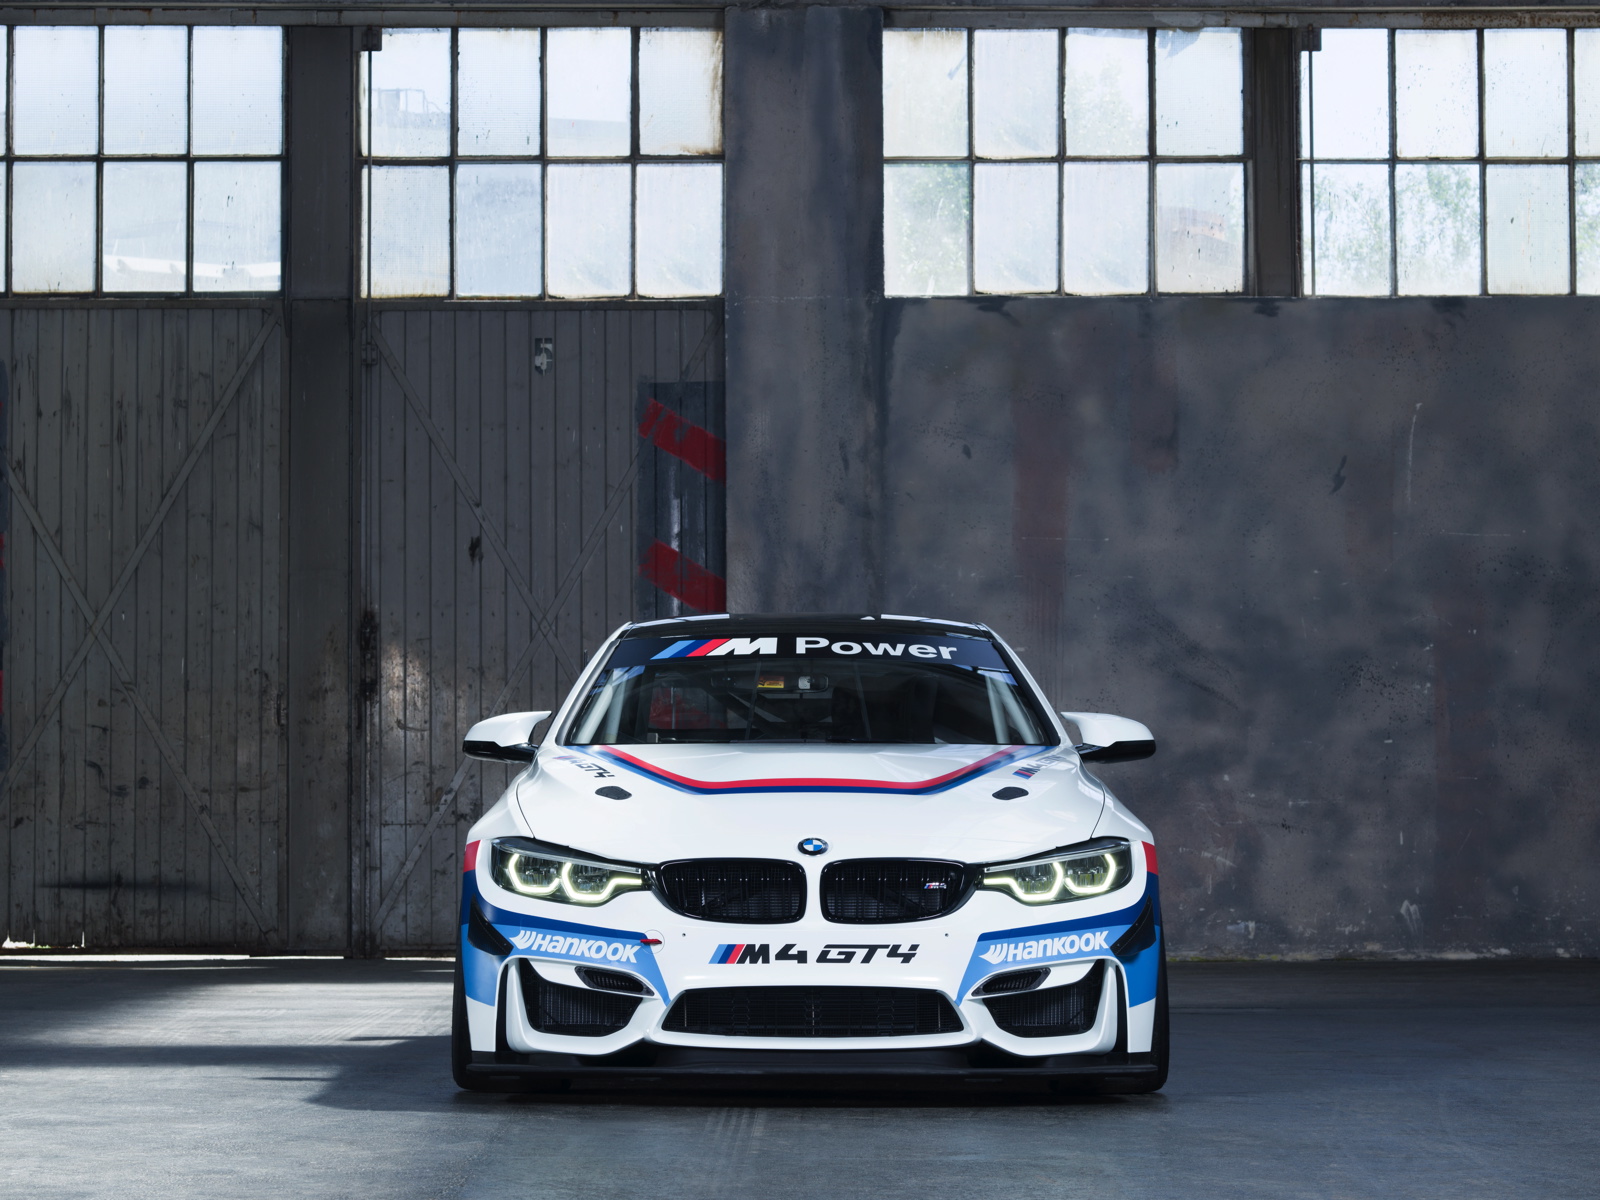 Check Out the New BMW M4 GT4